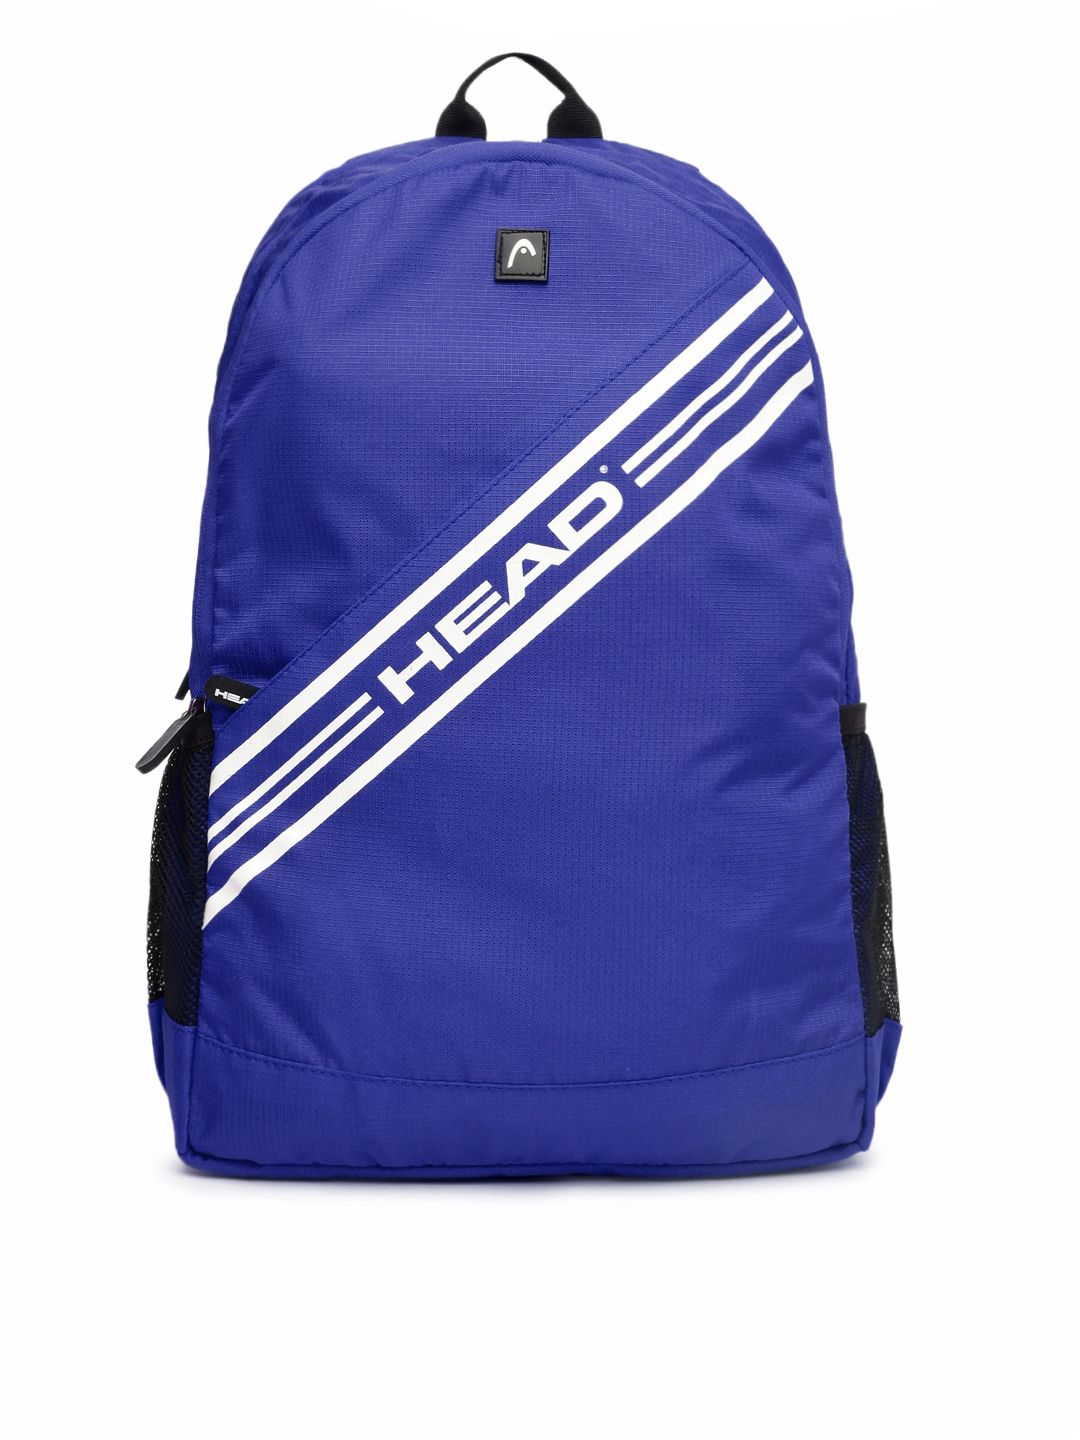 Head Unisex Blue Brand Logo Backpack Price in India